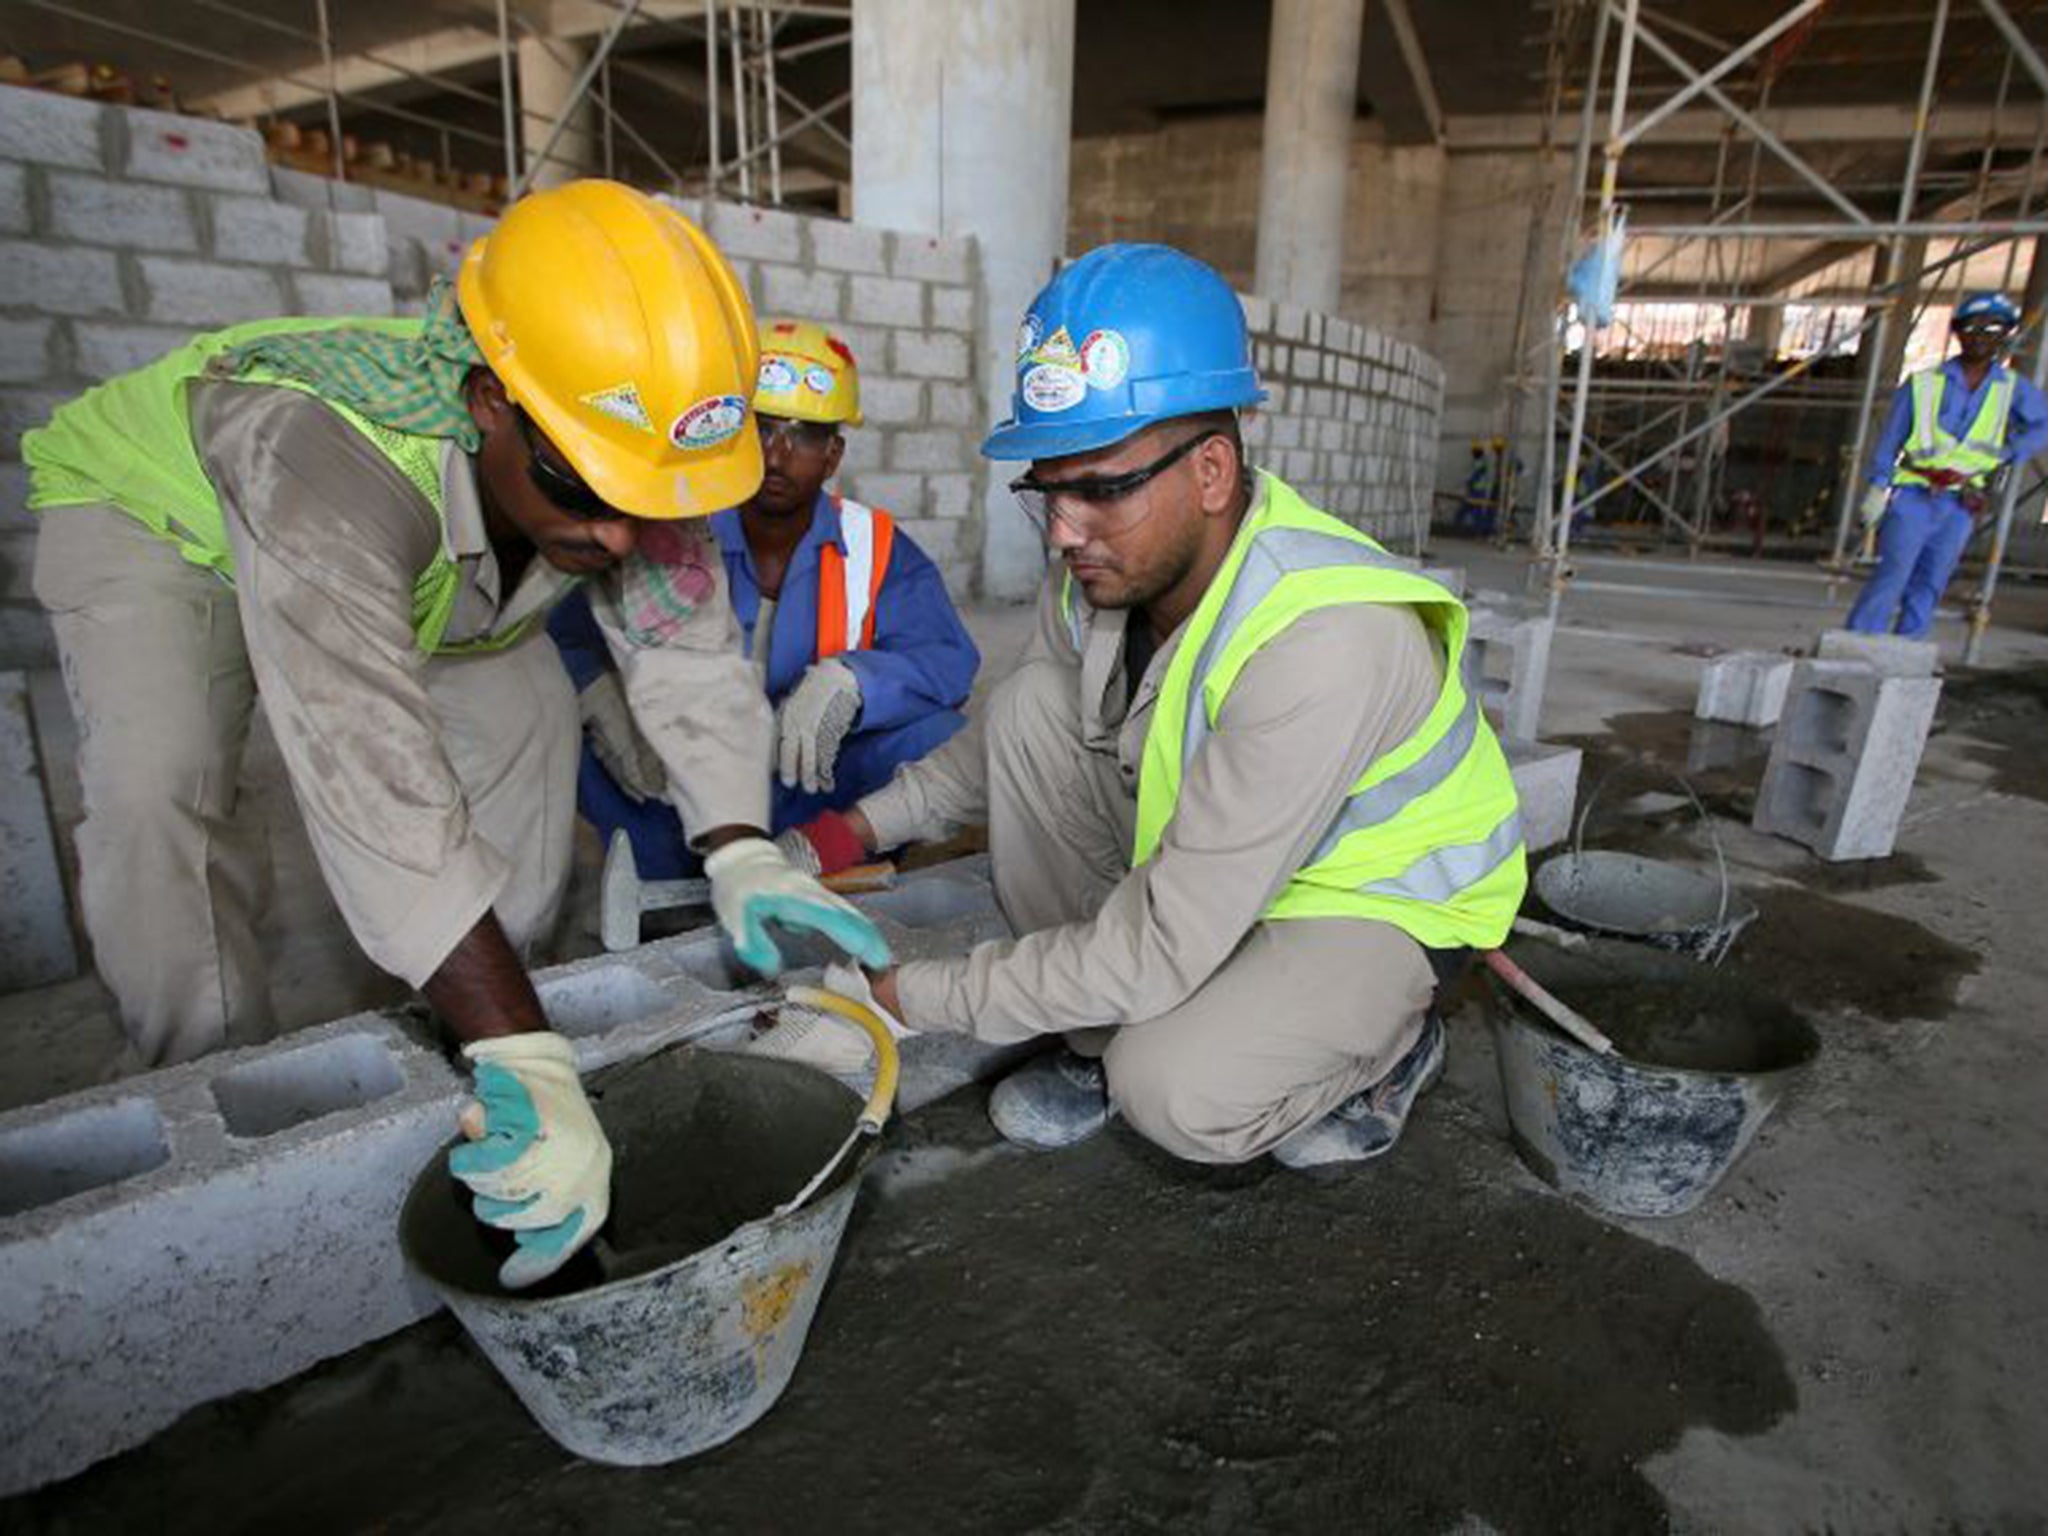 Migrant labourers work on a construction site in Doha in Qatar. Widespread abuses of migrant workers have been documented since the country was chosen to host the 2022 World Cup